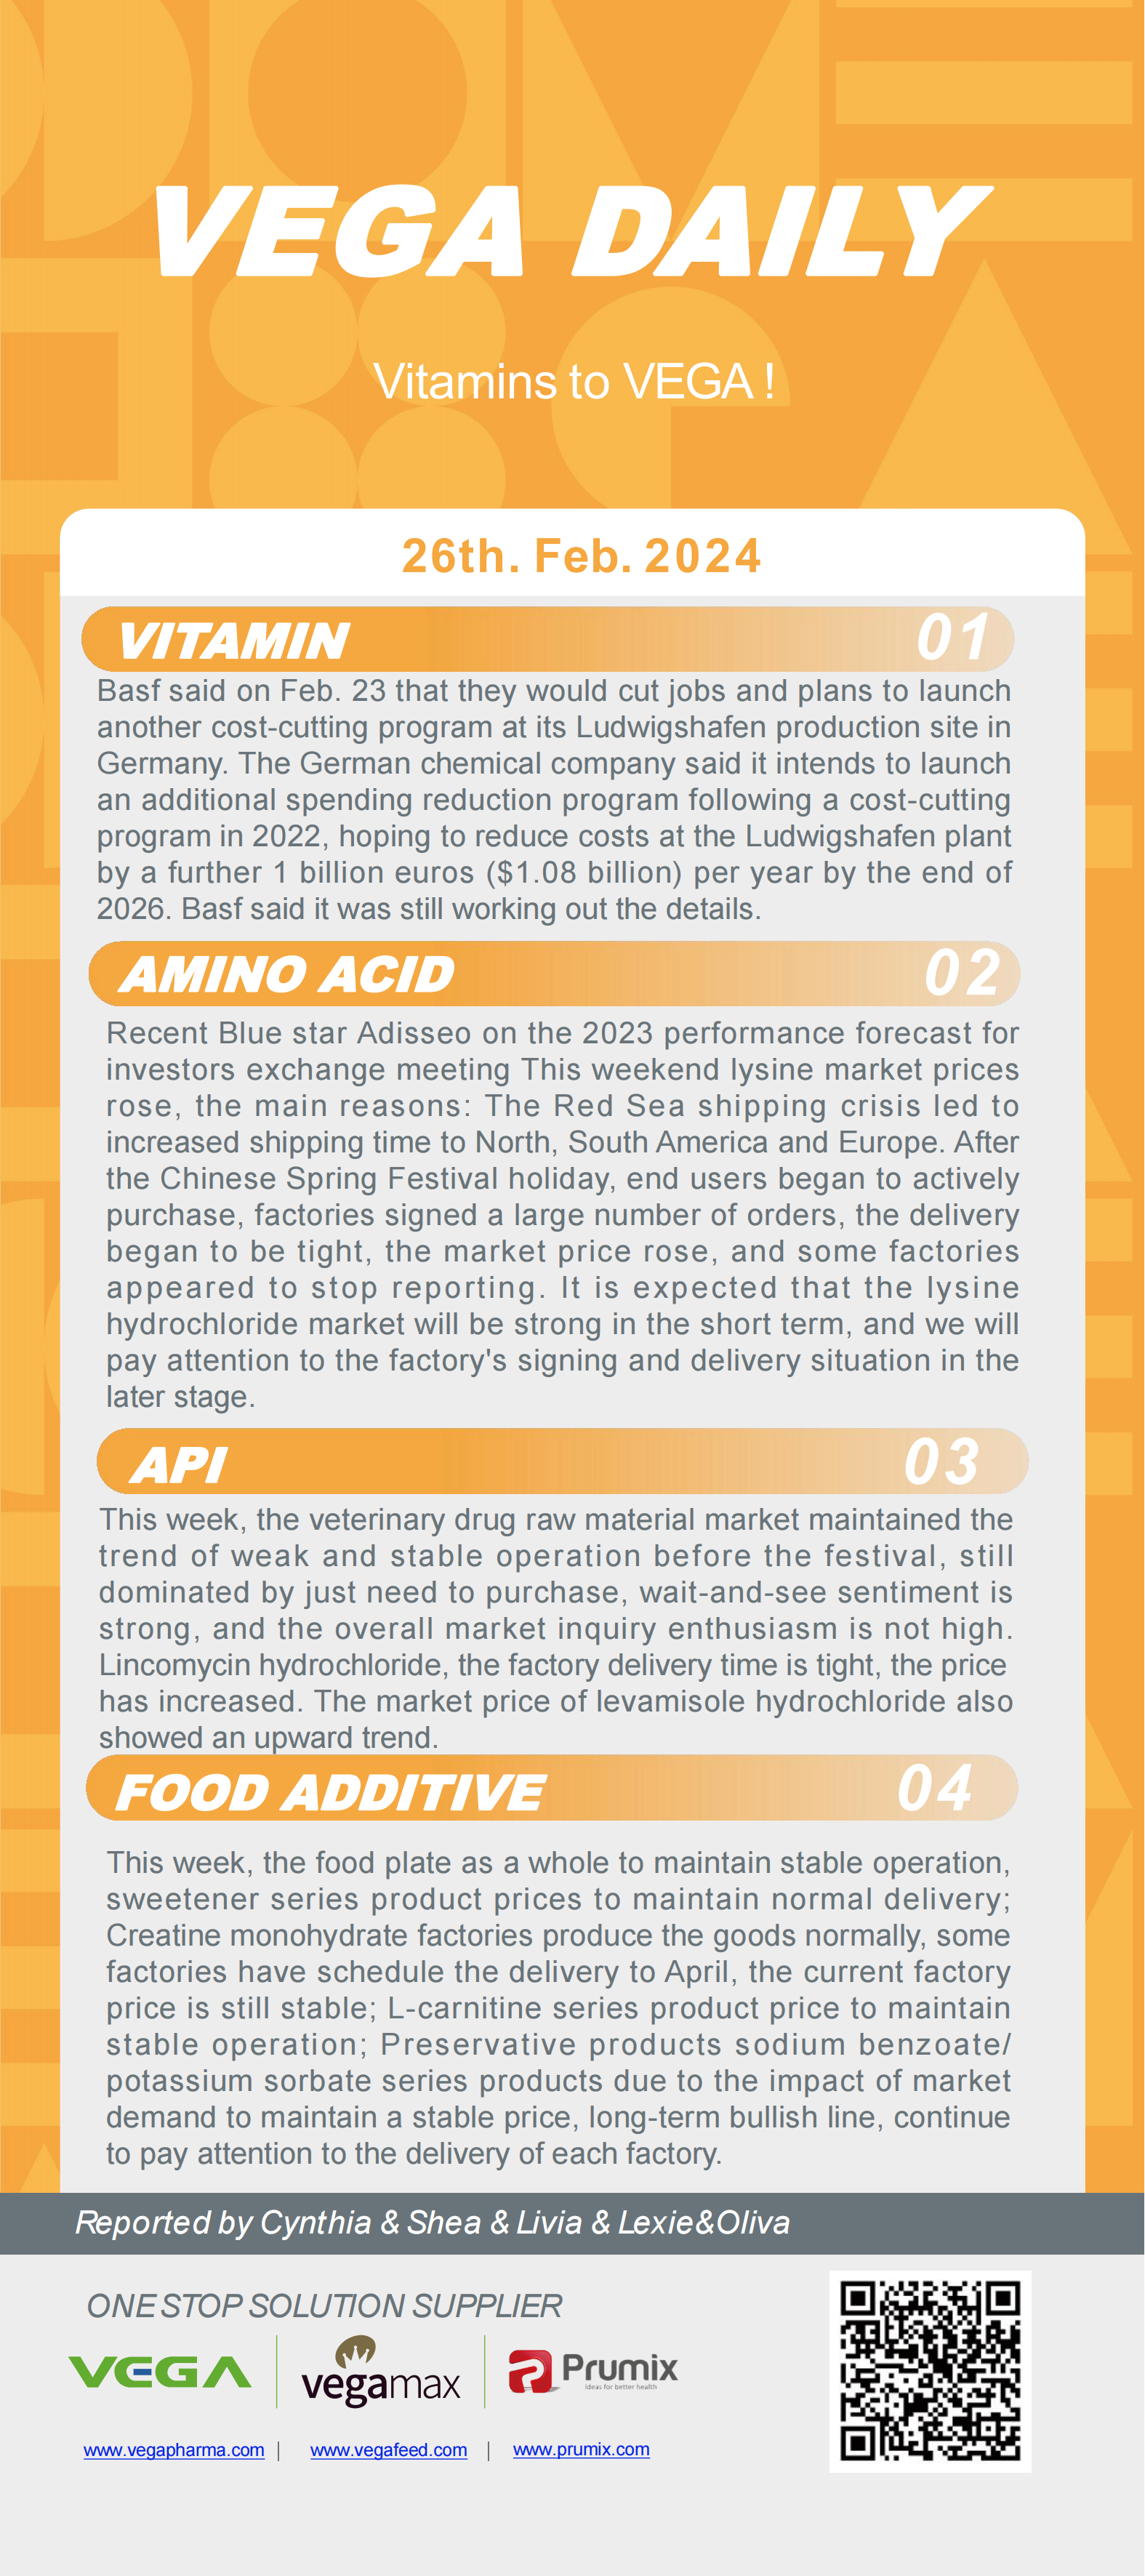 Vega Daily Dated on Fab 26th 2024 Vitamin Amino Acid APl Food Additives.png